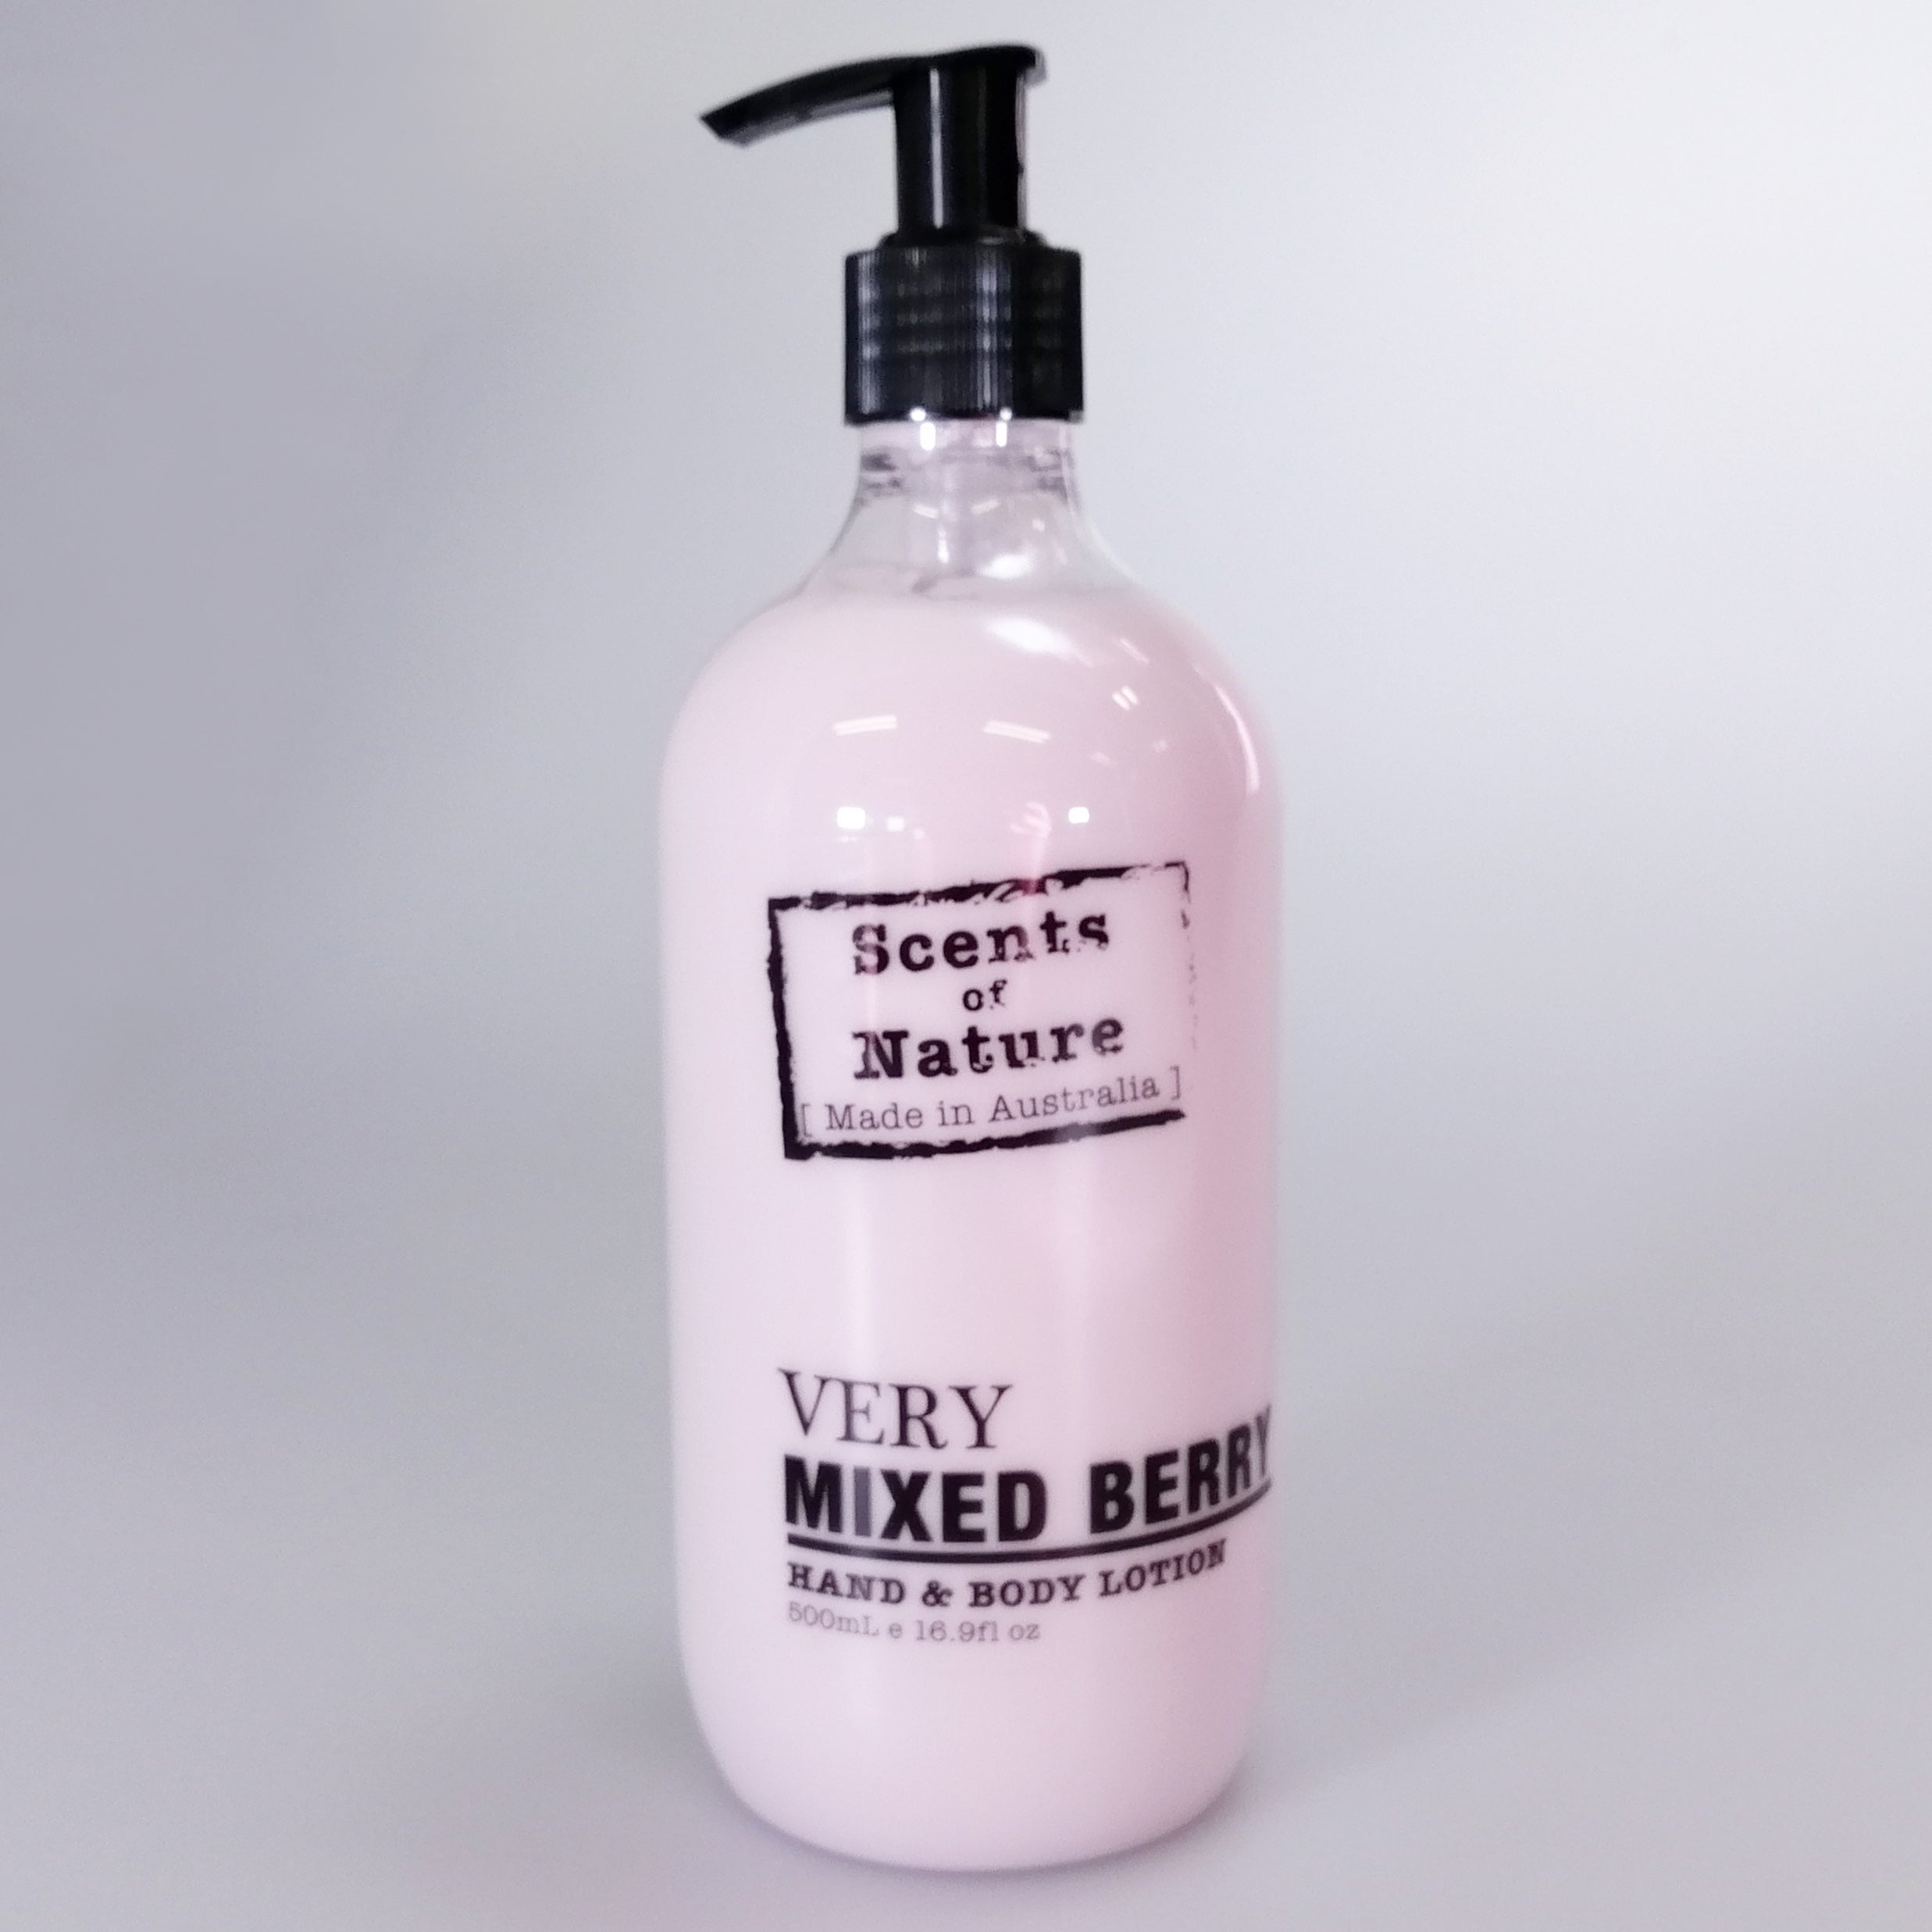 Hand & Body Lotion - Very Mixed Berry - 500ml